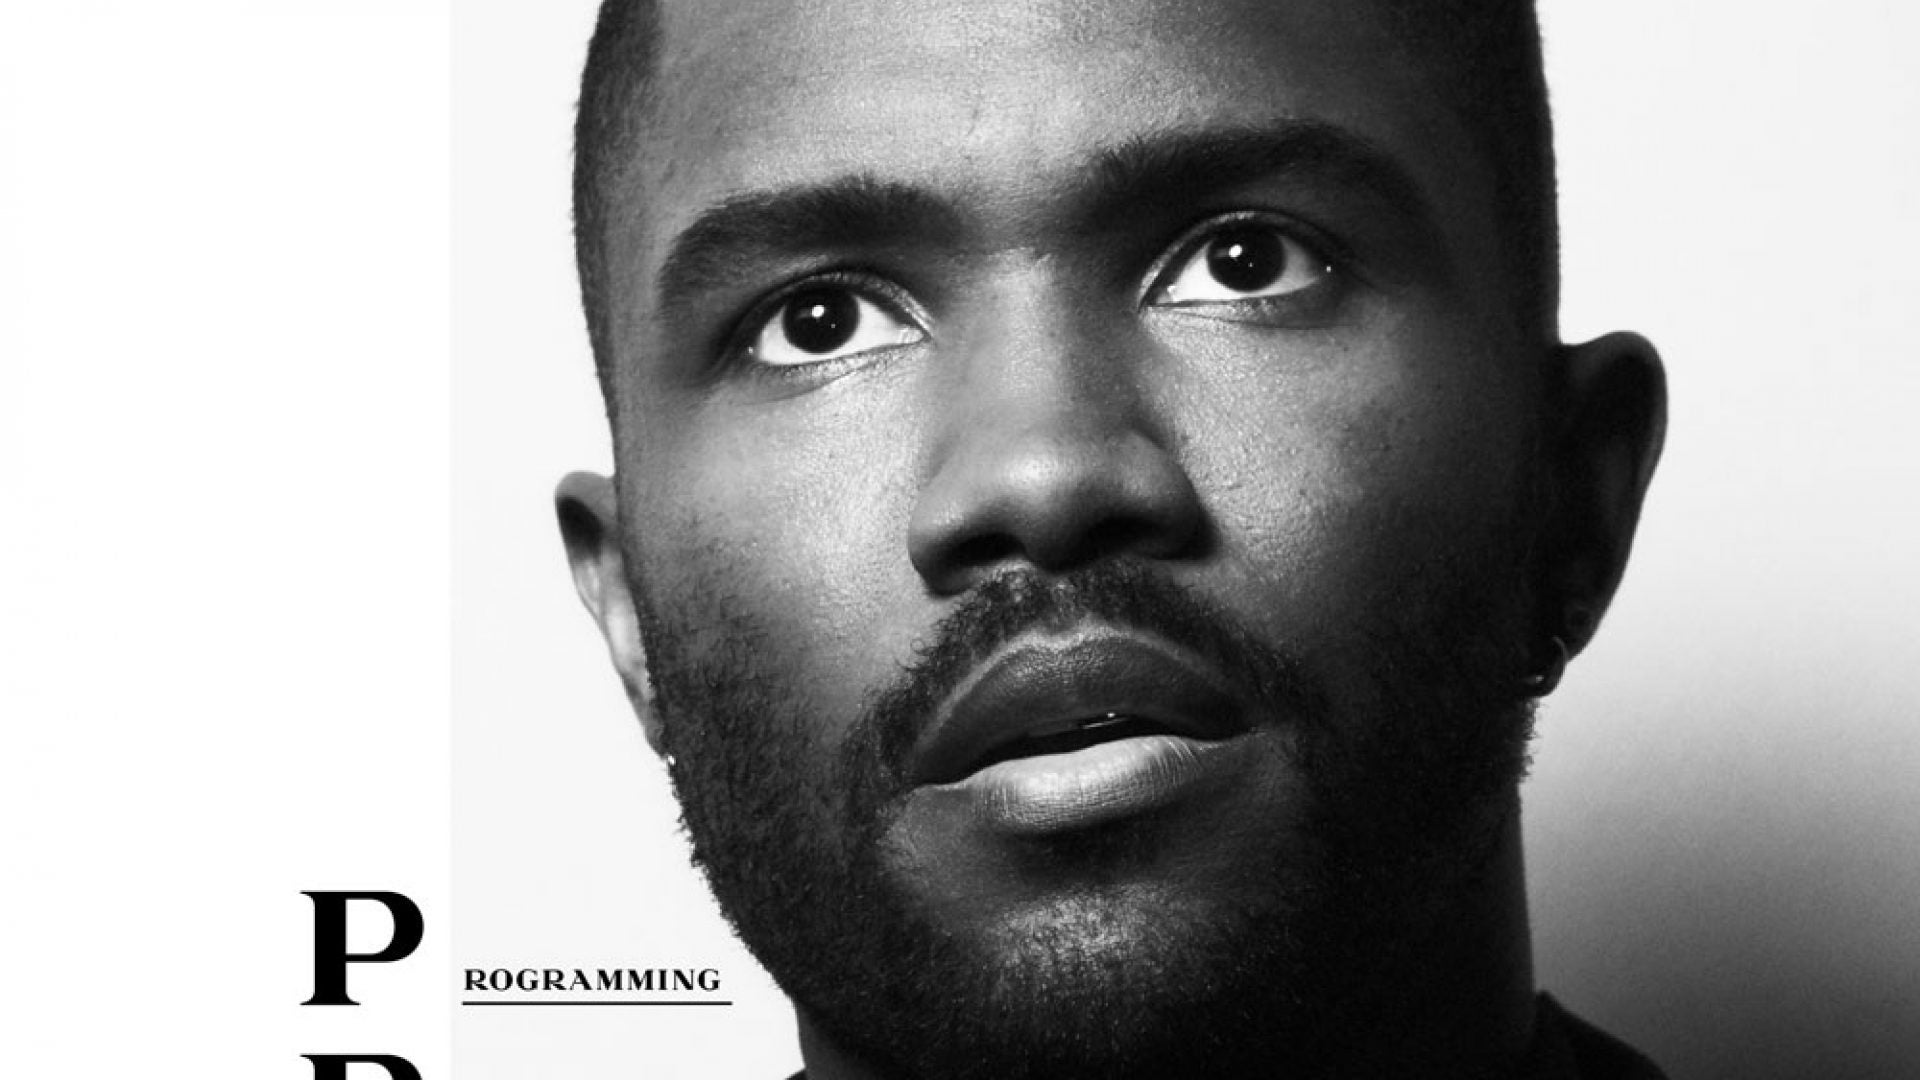 Frank Ocean Is The New Face Of A Prada Campaign